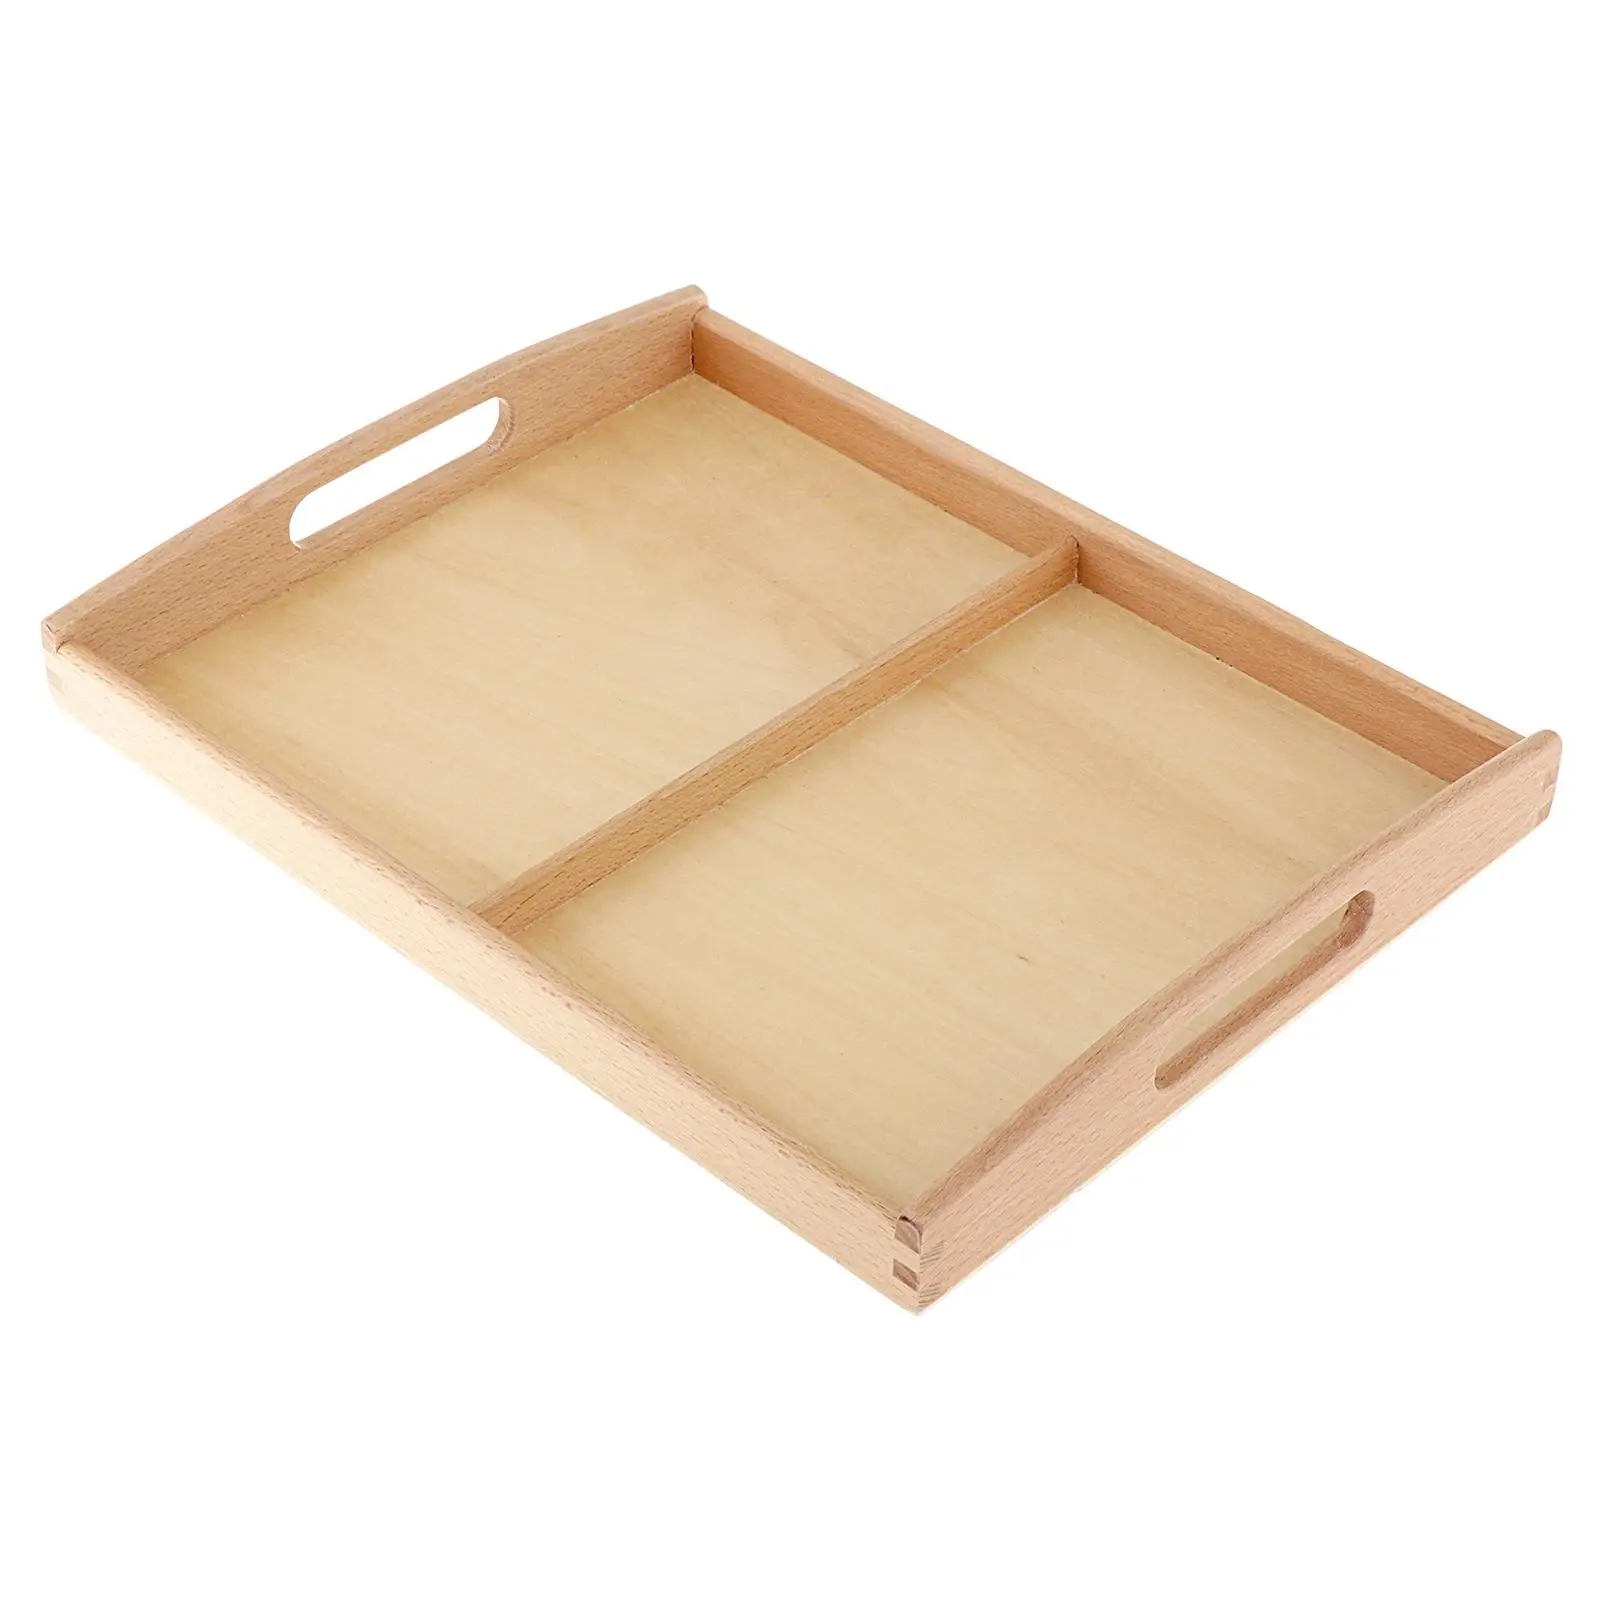 Montessori Wooden Sorting Tray 2 Compartments with Handles Wooden Sorting Toys Trays for Preschool Learning Kids Card Display